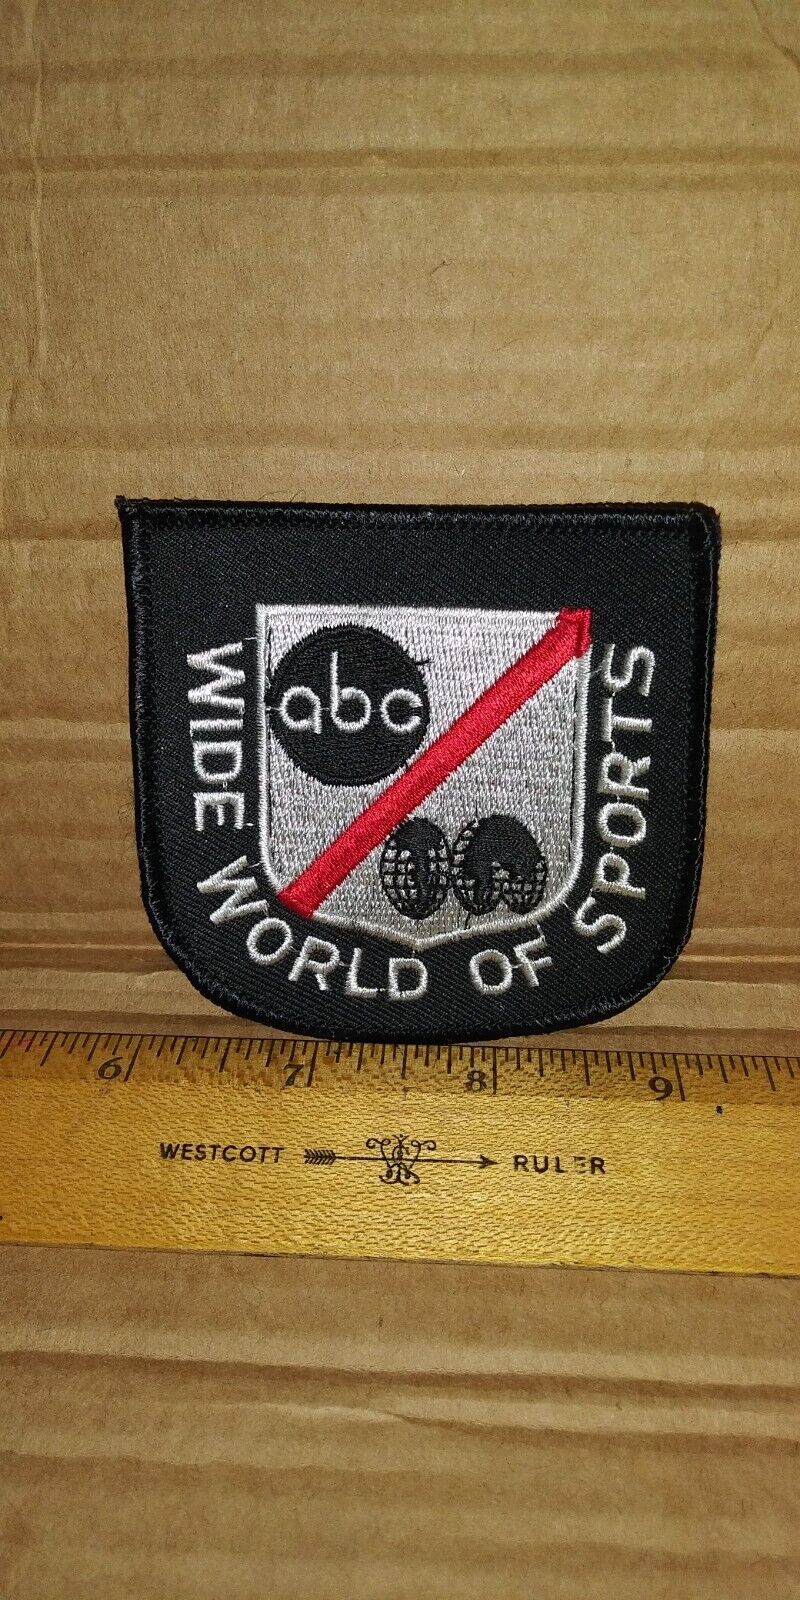 ABC Wide World of Sports Patch - 